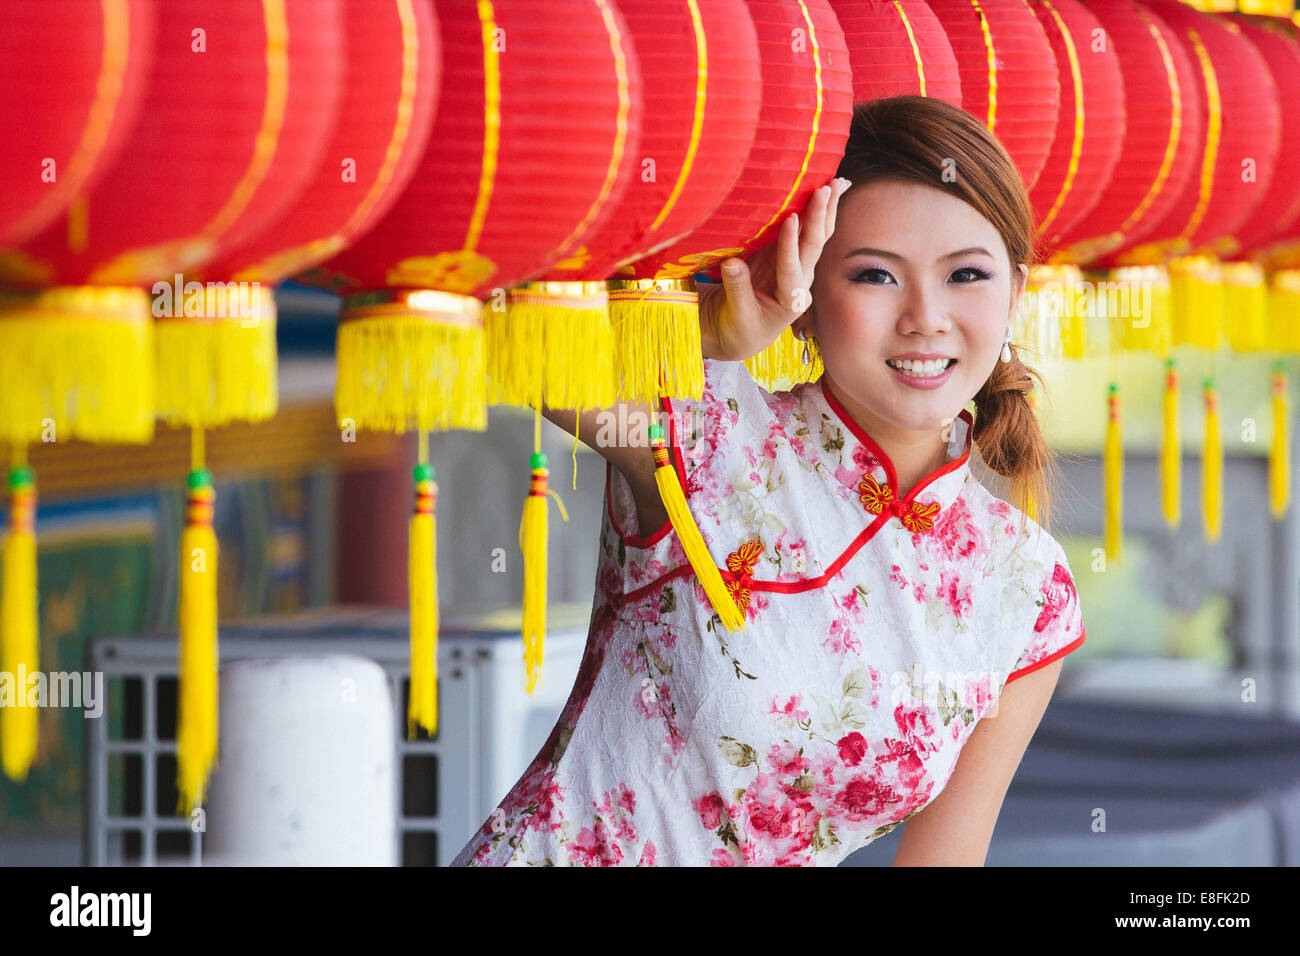 Portrait of young woman standing by Chinese paper lanterns Stock Photo